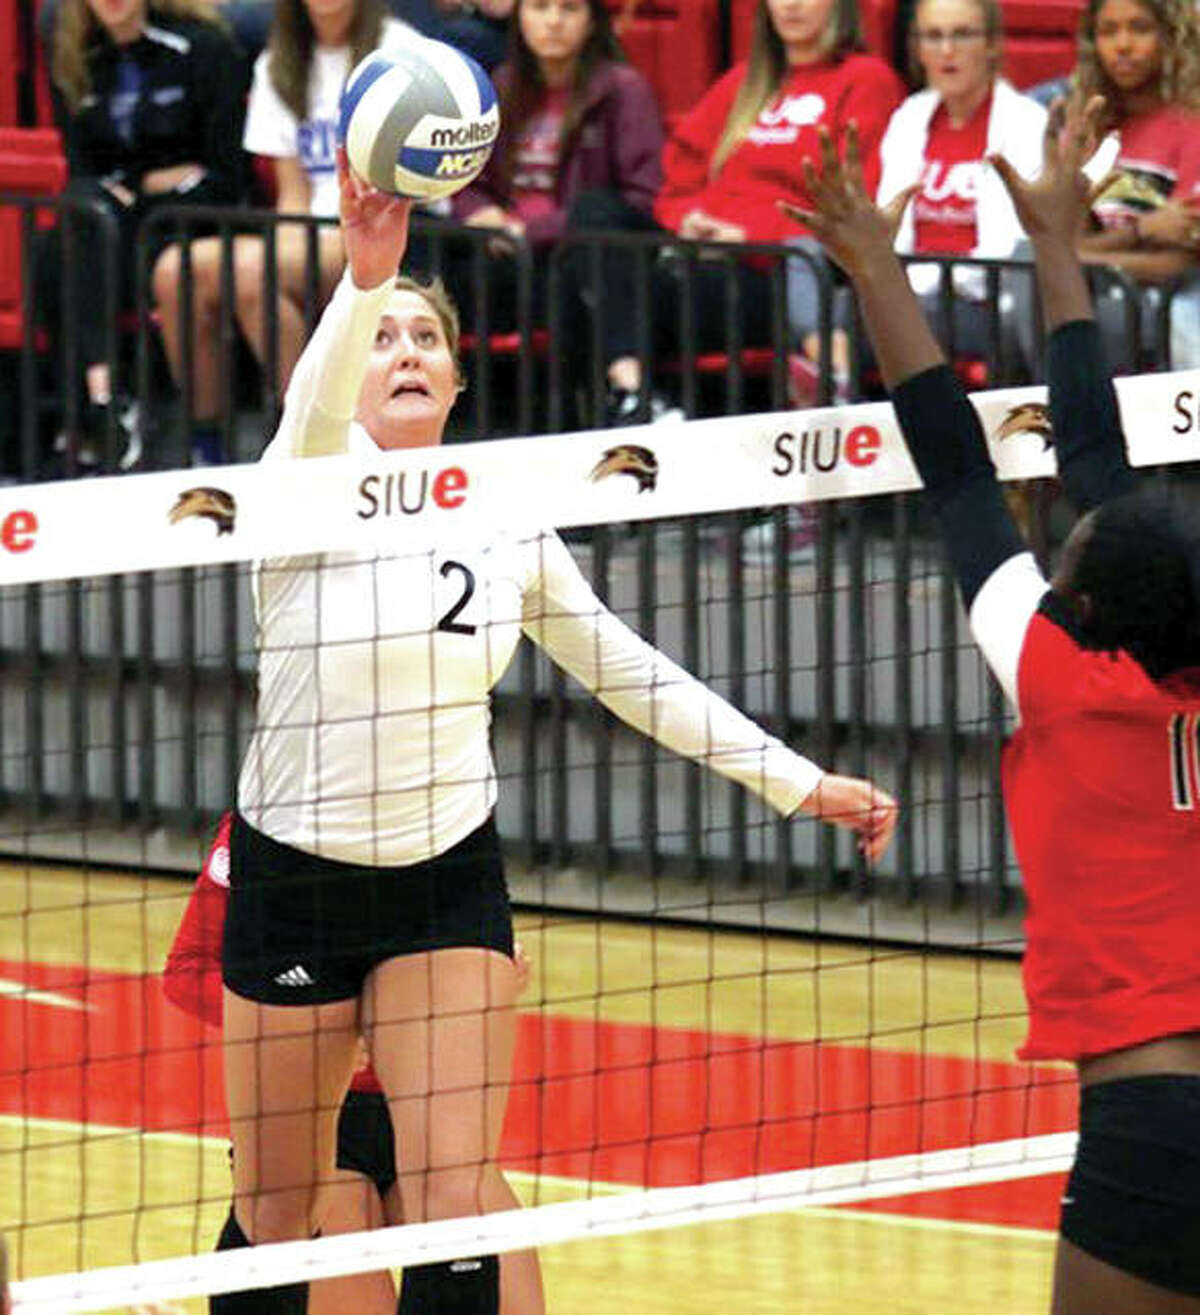 SIUE’s Taylor Joens recorded the final two kills of the match and led the Cougars with 18 in Friday night’s win over Toledo in the opening round of the Fort Wayne Invitational Fort Wayne, Indiana.